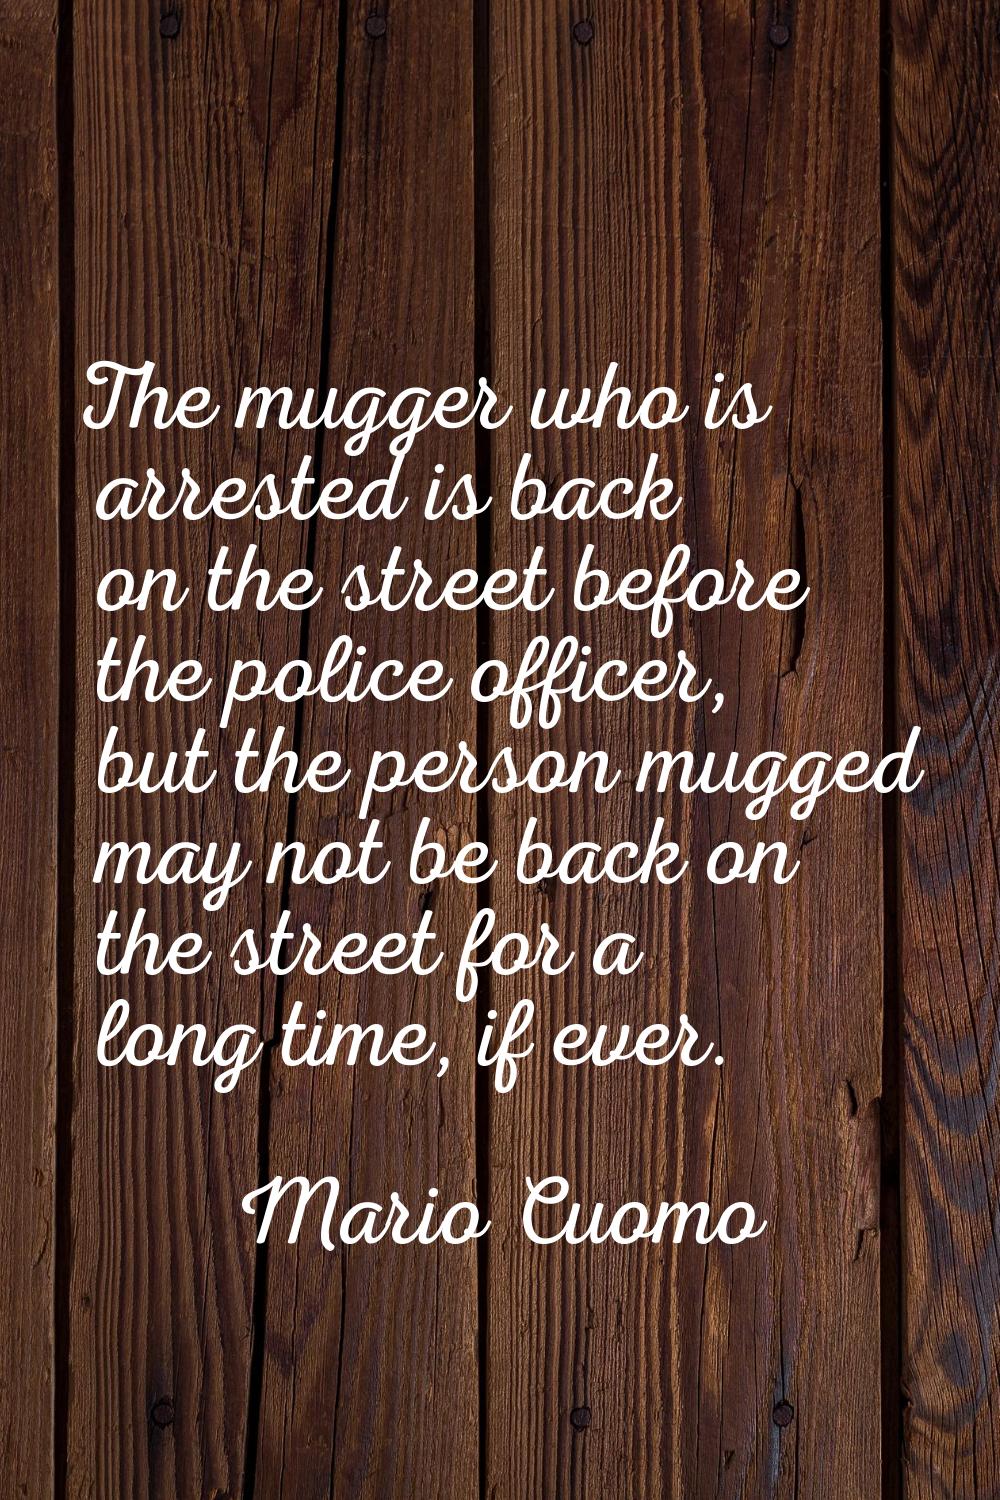 The mugger who is arrested is back on the street before the police officer, but the person mugged m